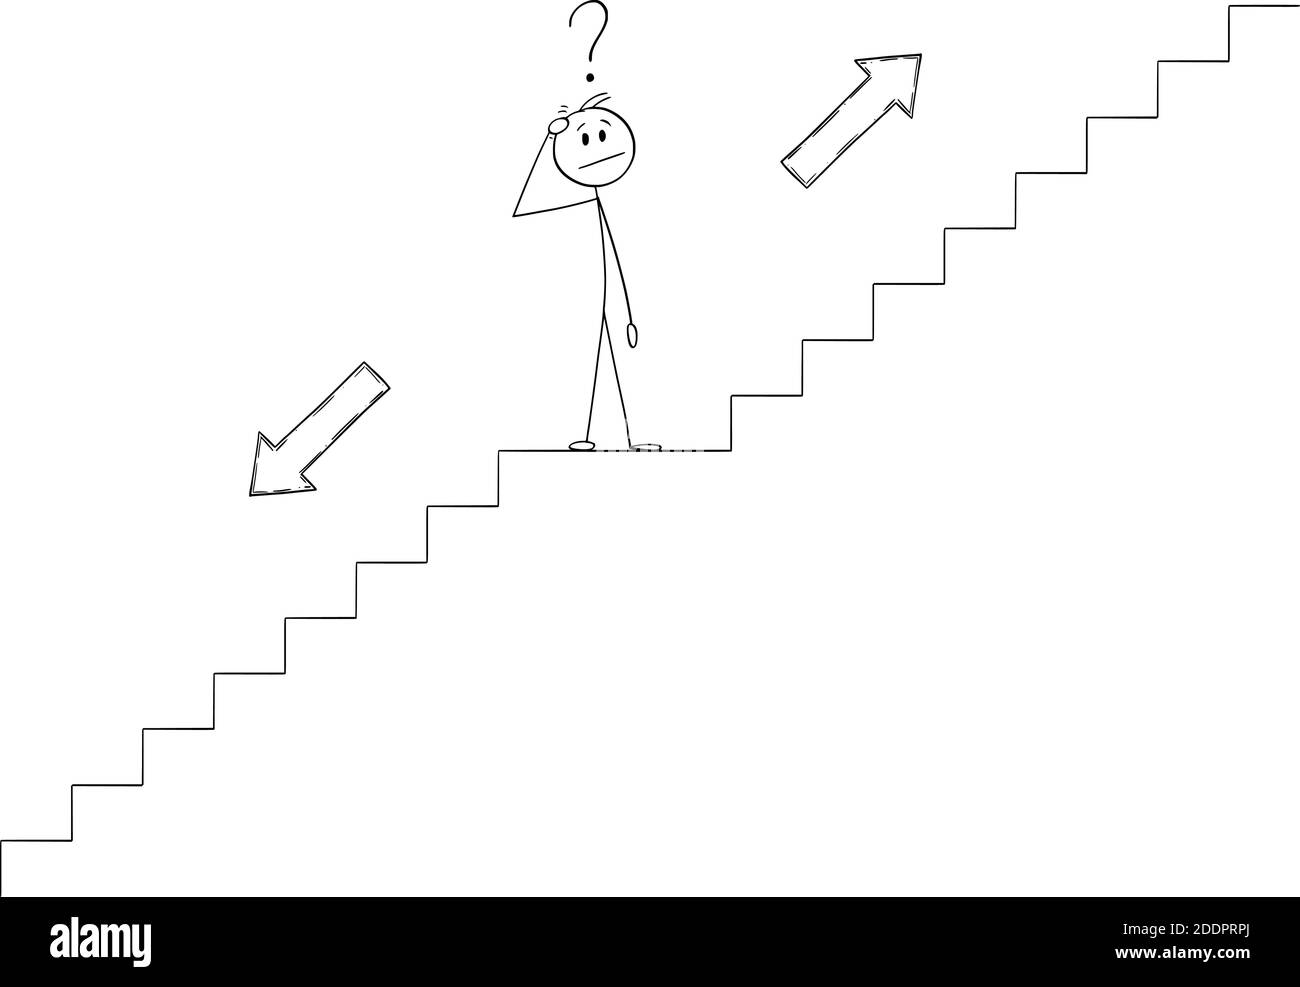 Vector cartoon stick figure illustration of man or businessman thinking on stairs or staircase or stairway and thinking about future direction, choosing to go up or down. Stock Vector